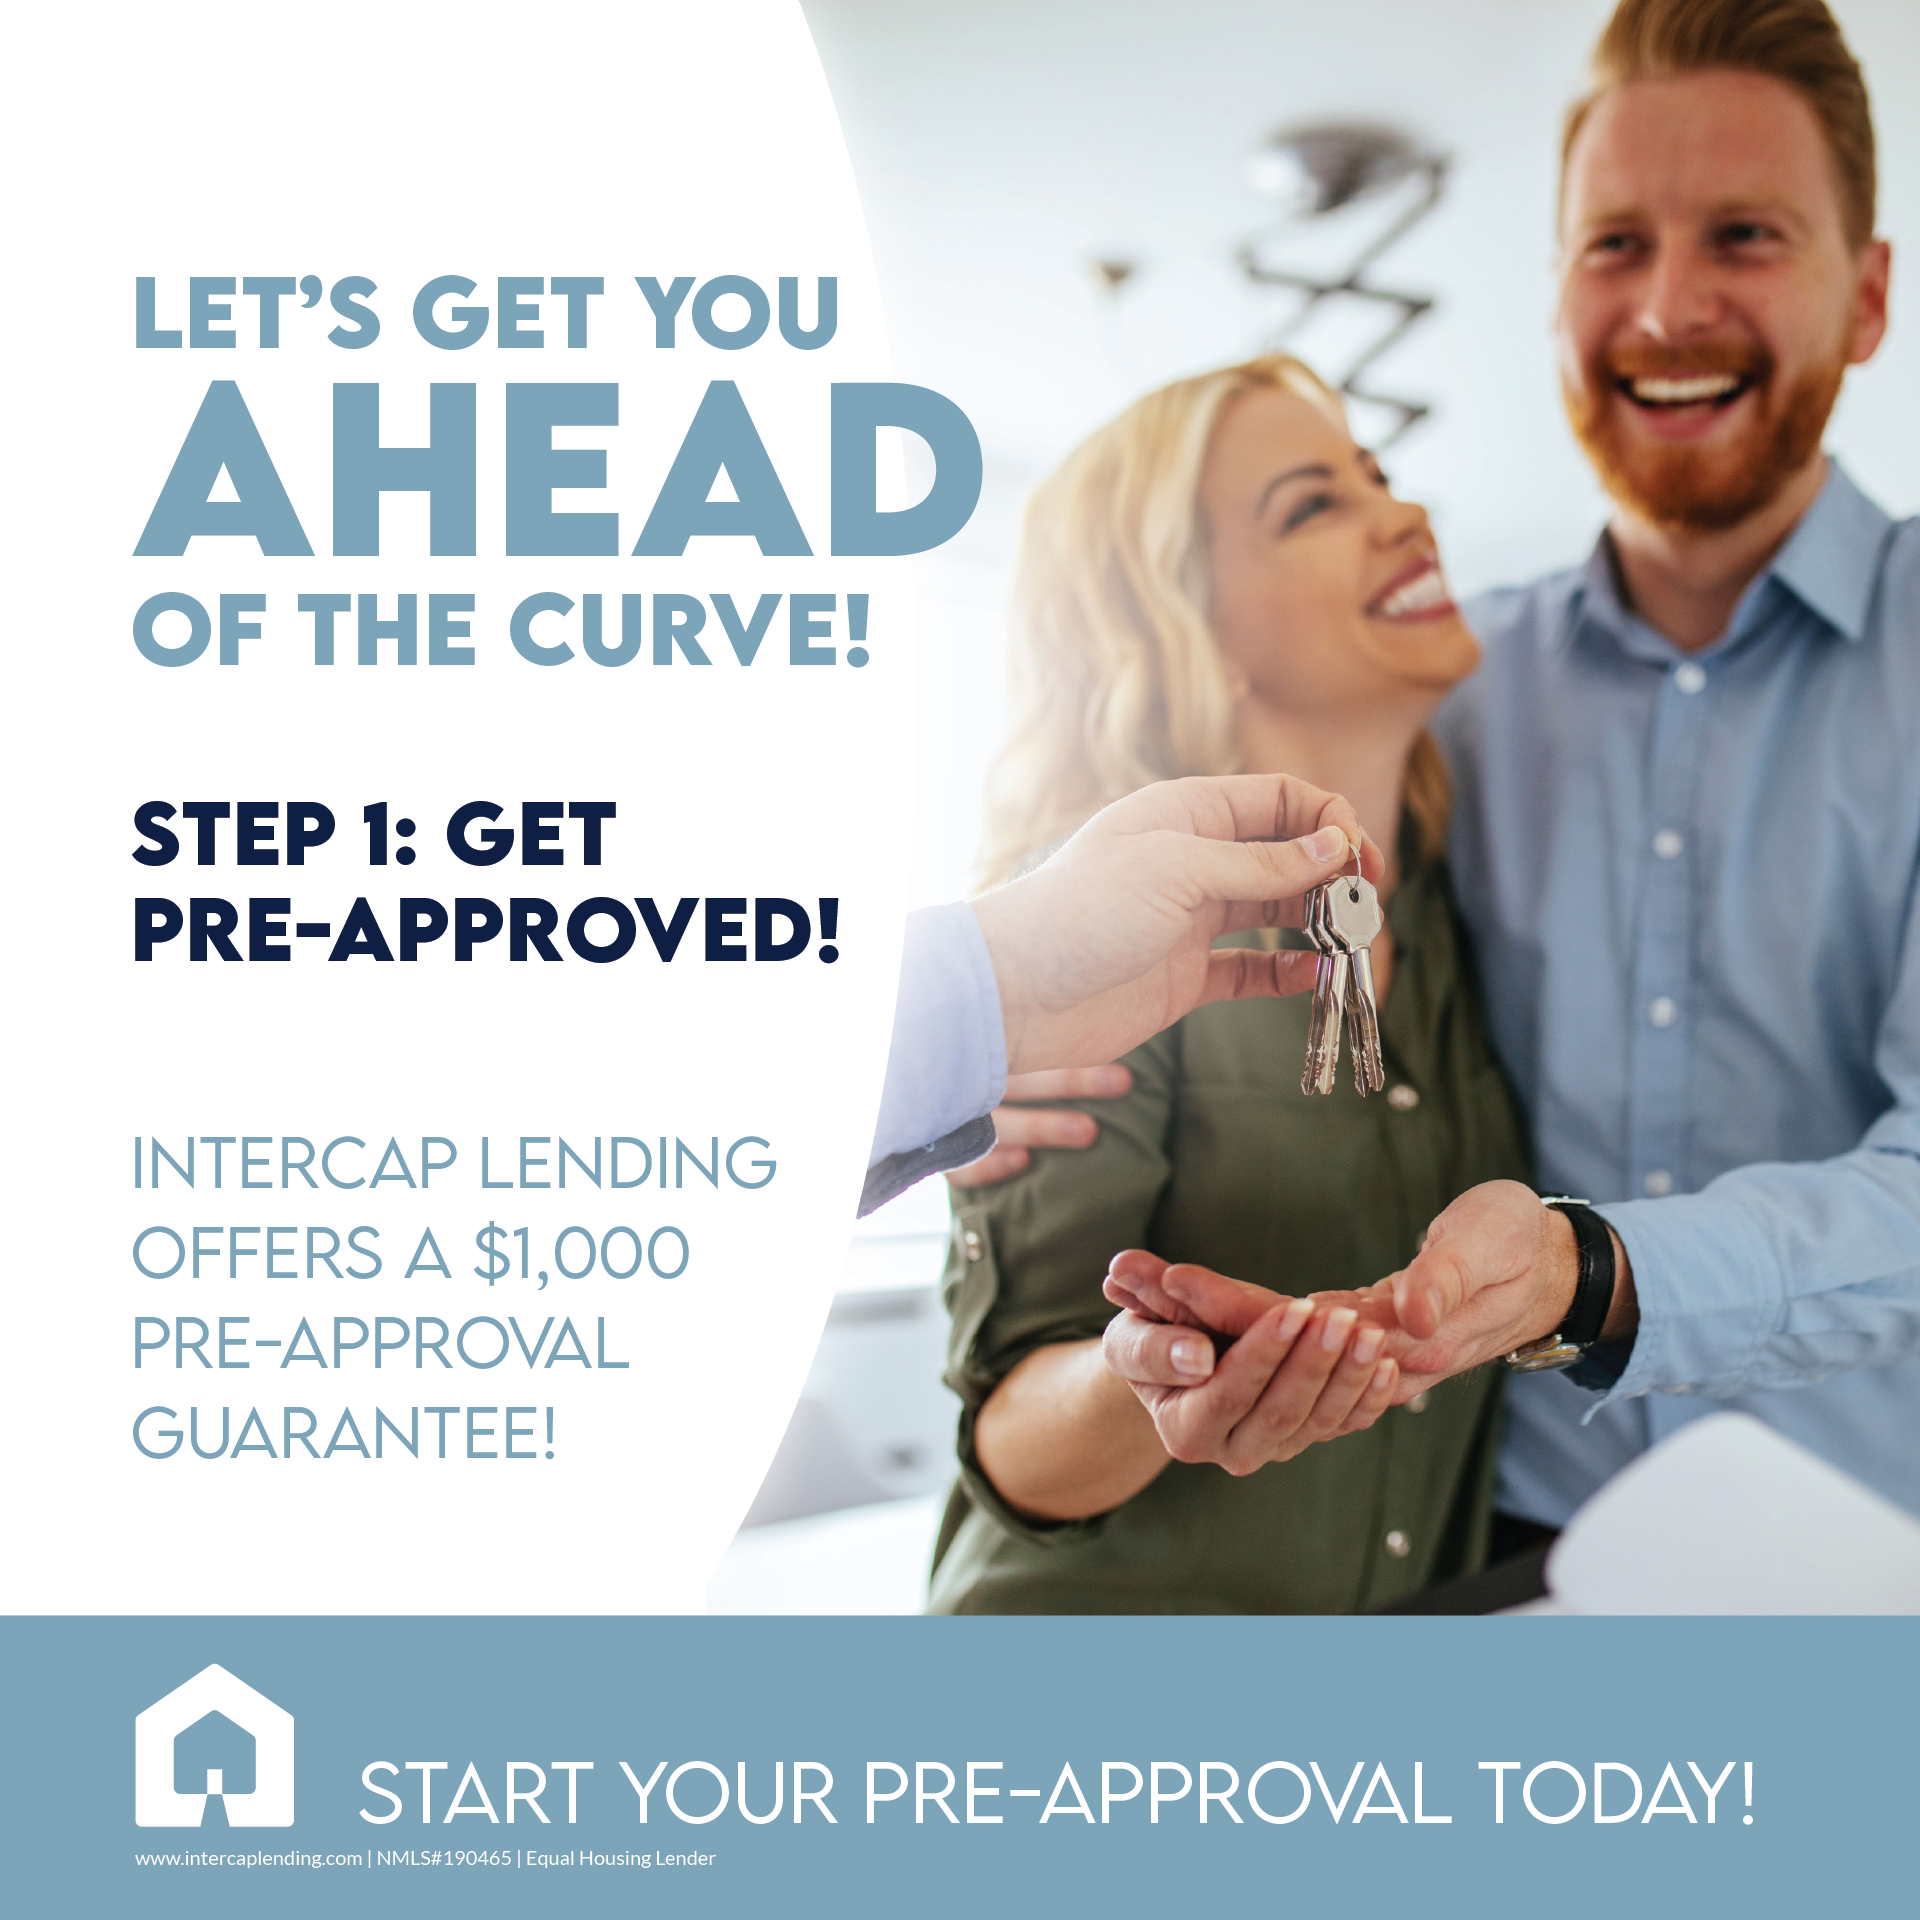 Get pre-approved for a home loan